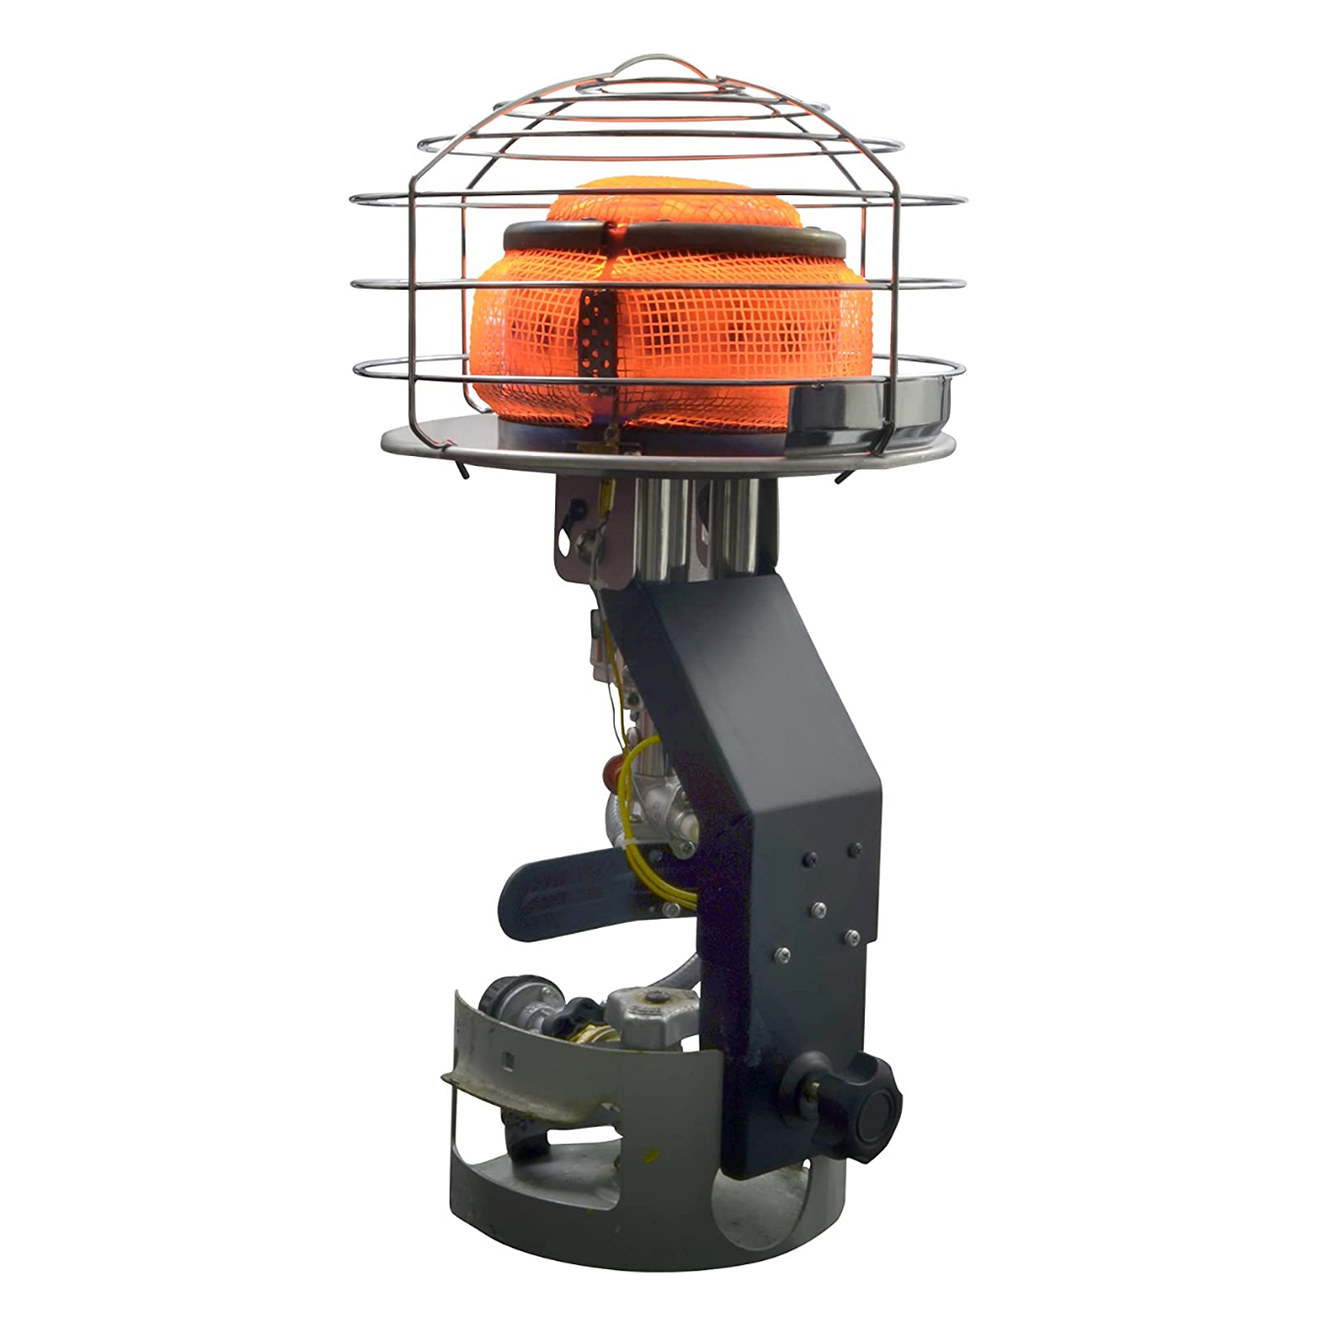 An image of a Mr. Heater radiant propane heater 